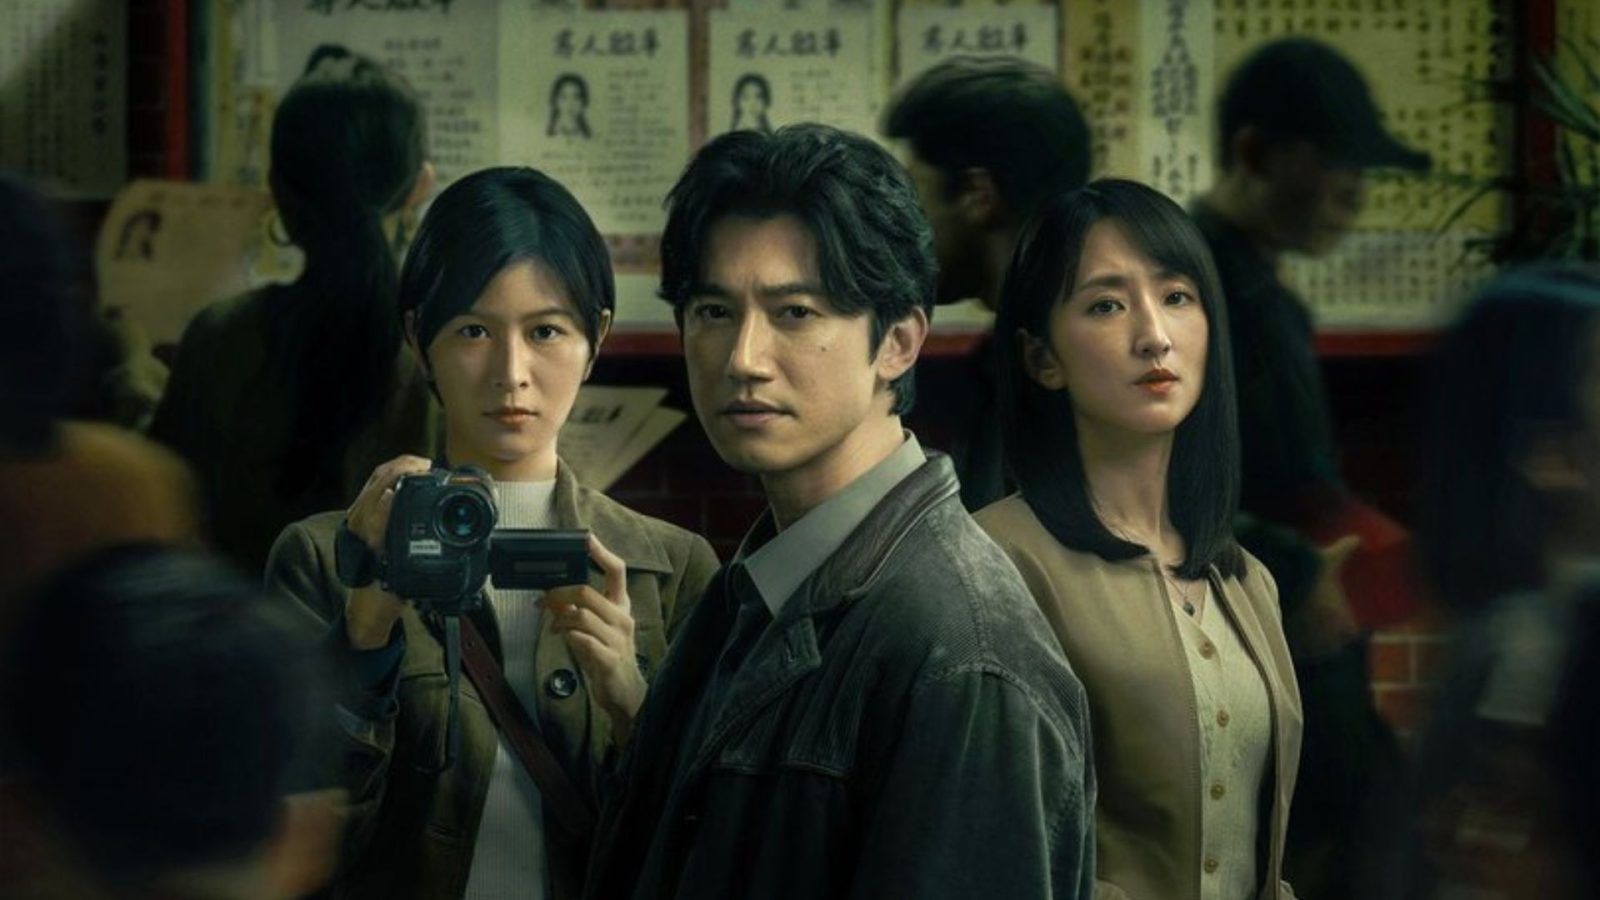 Copycat Killer' is the first Taiwanese series on Netflix's Global Top 10 chart